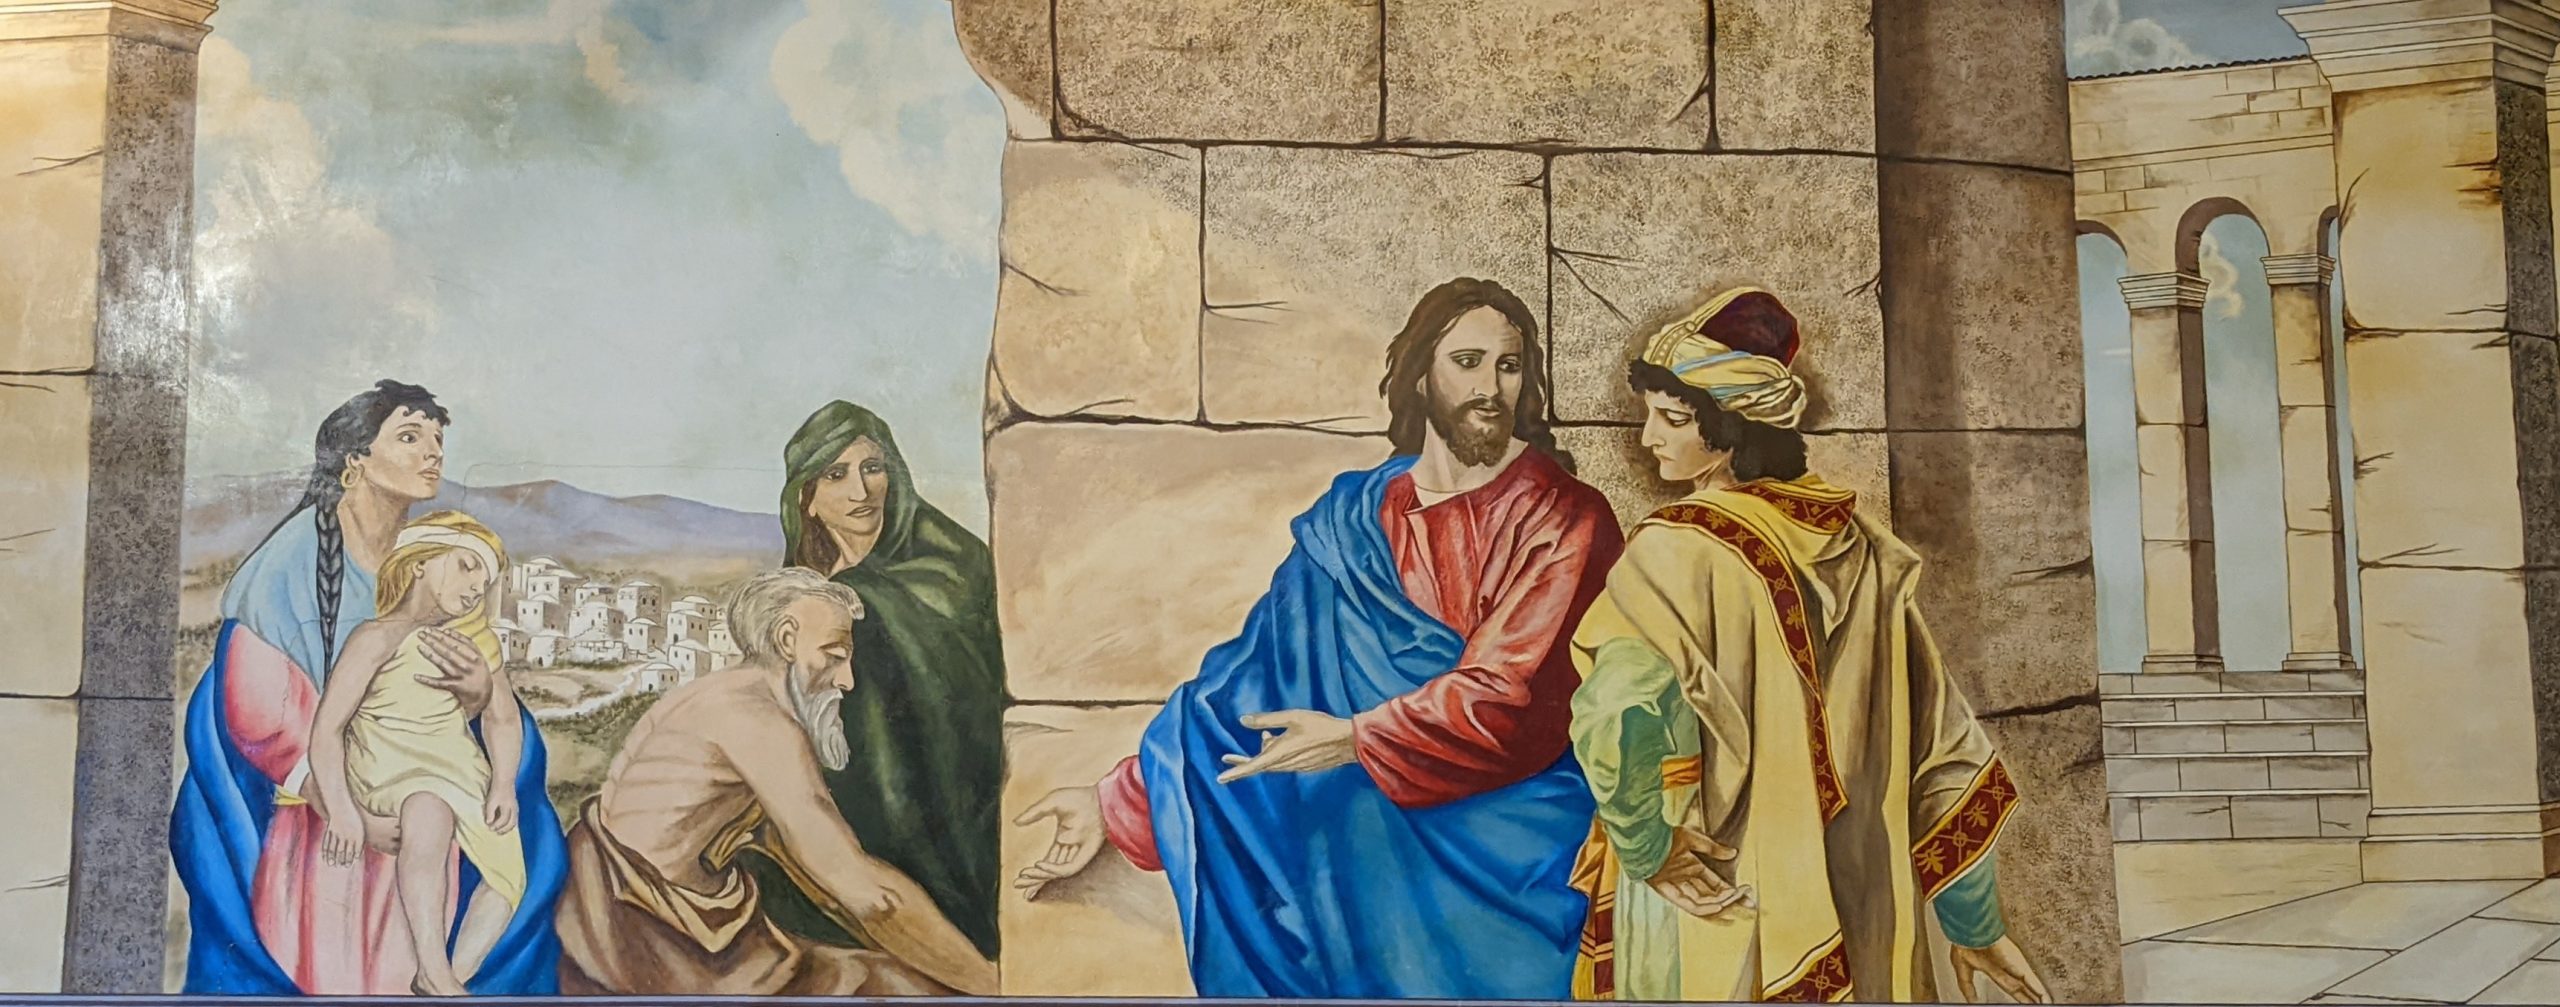 Mural of Jesus talking to his disciples